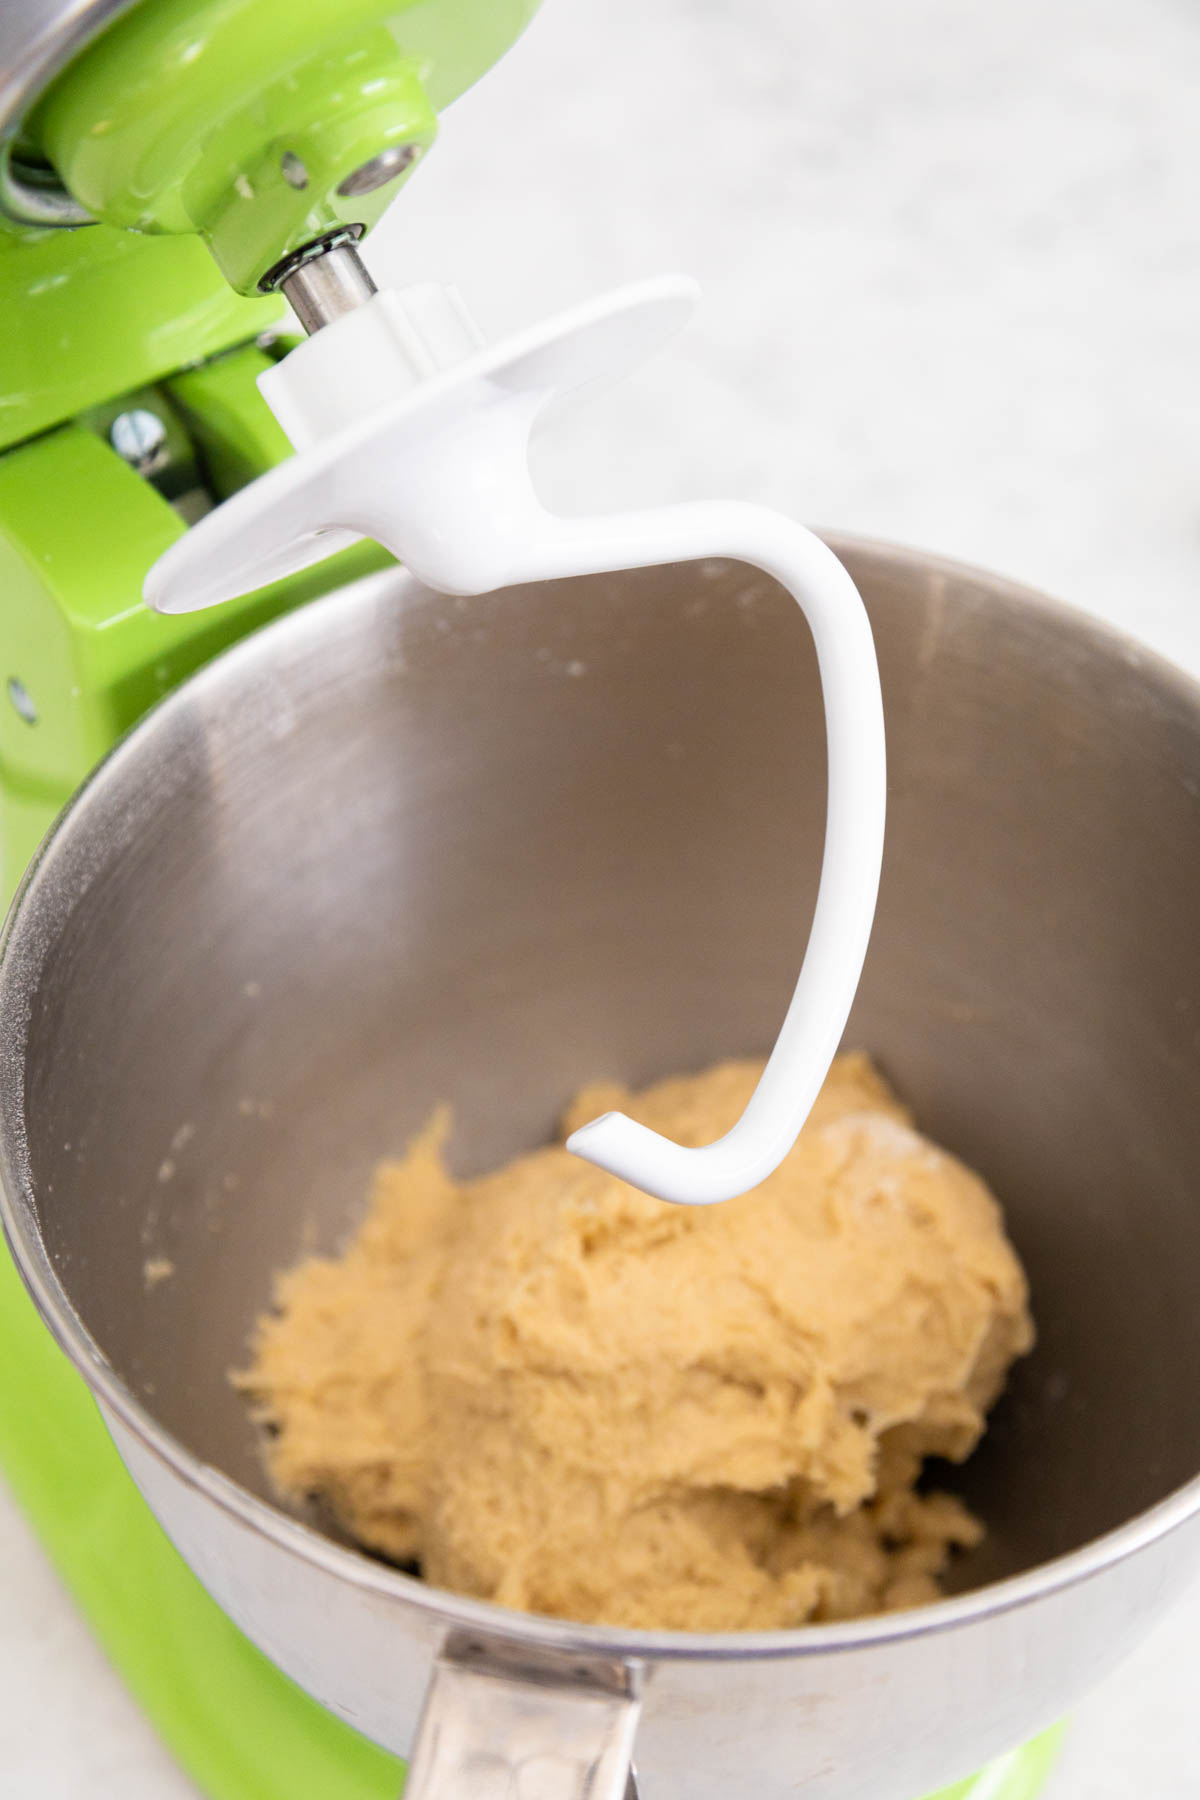 The bowl of the stand mixer has the dinner roll dough and the dough hook is ready to knead it.